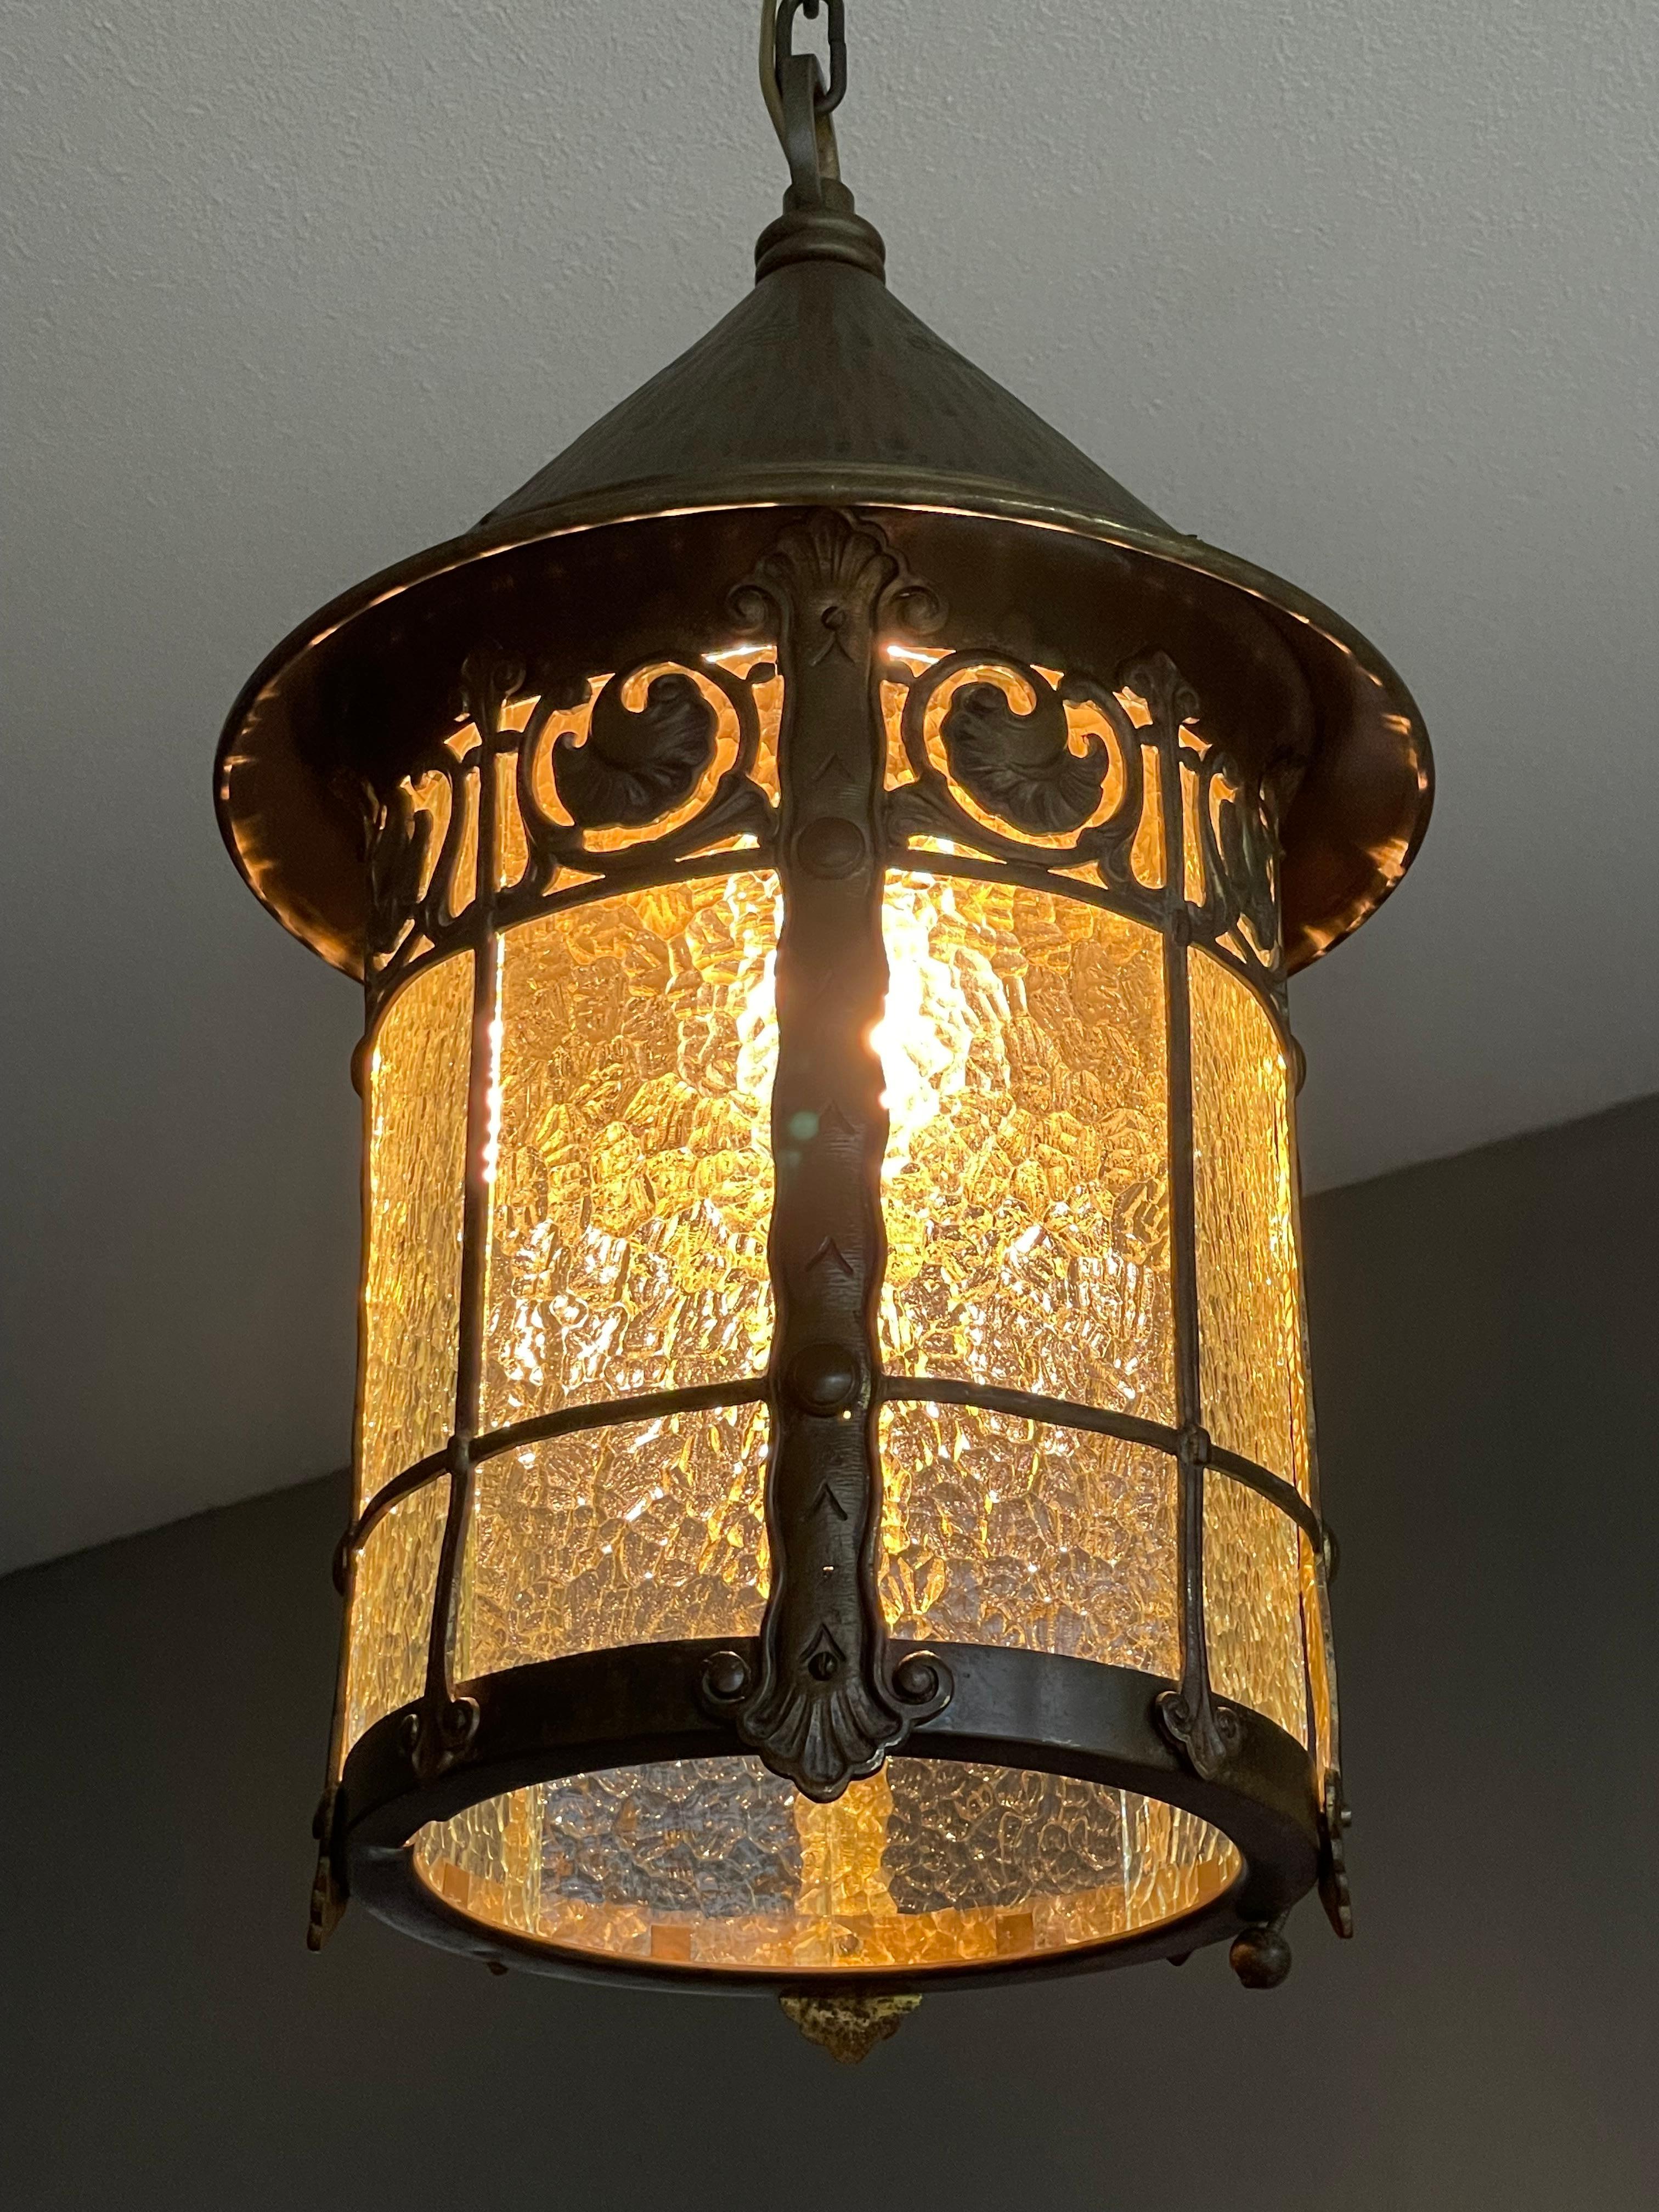 Impressive and finer quality craftsmanship light fixture. 

If you are a collector of rare and all-handcrafted art and antiques then this sizable and one of a kind pendant could be flying your way soon. With antique light fixtures being one of our